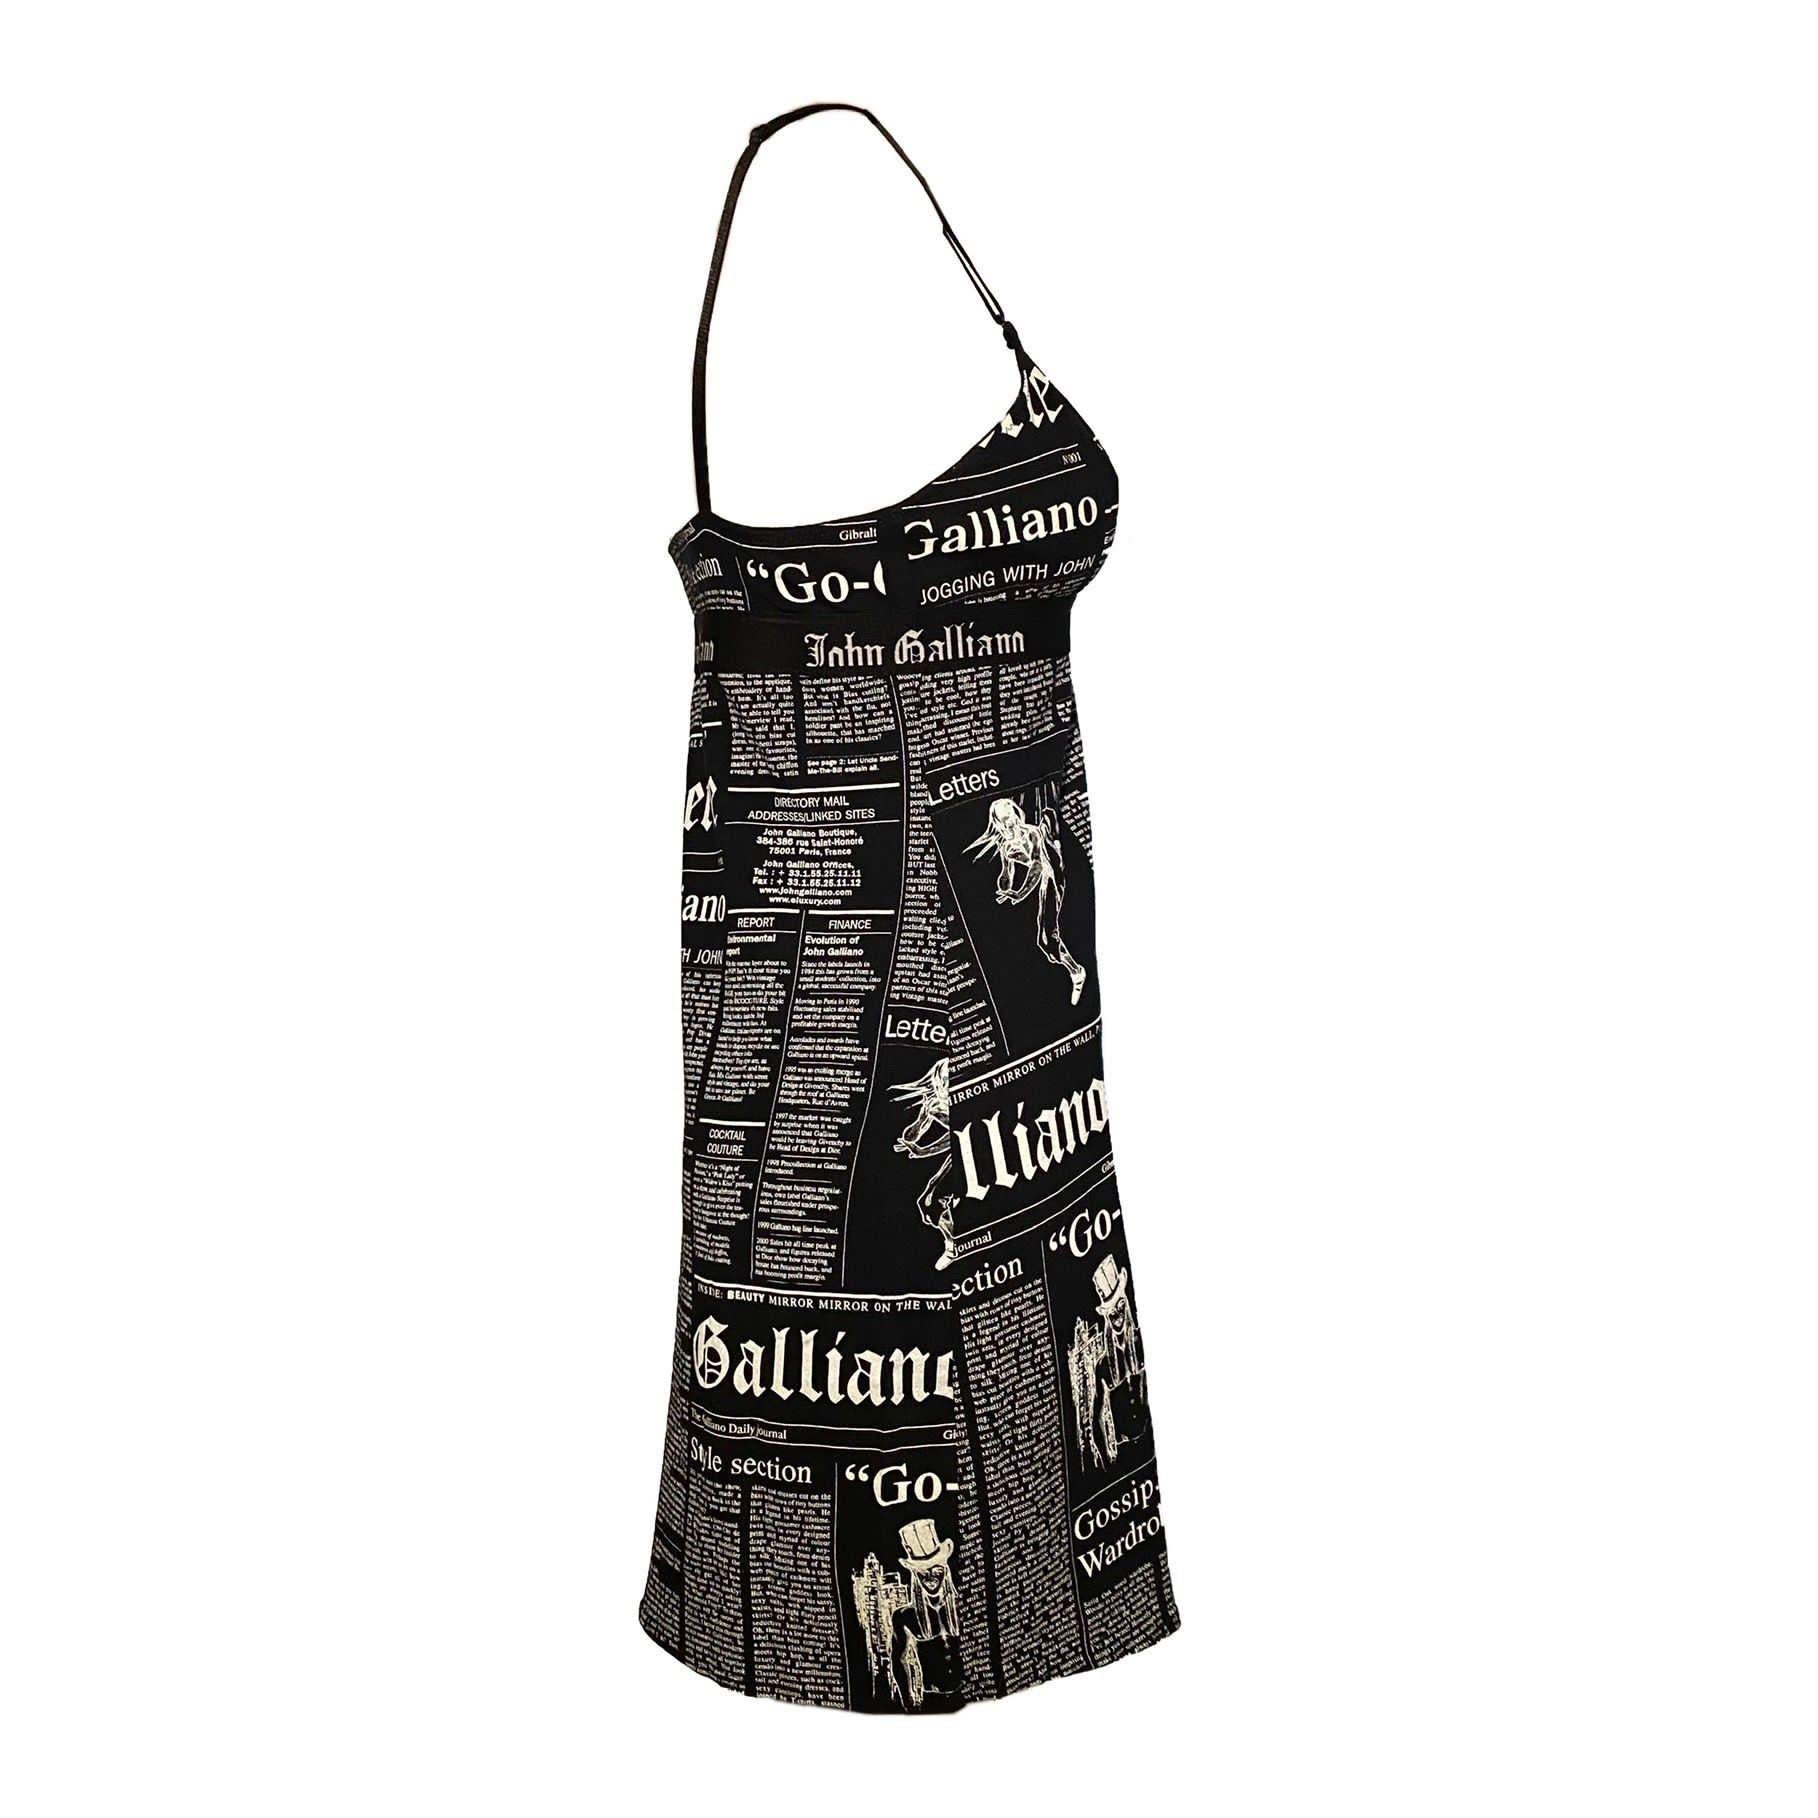 John Galliano early 2000s newspaper dress featuring the iconic “Gazette” print in black/white. Under-bust elastic logo band.

Size L, adjustable straps

Bust: 74 cm / 29.1 inch
Length (from pit): 61 cm / 24 inch